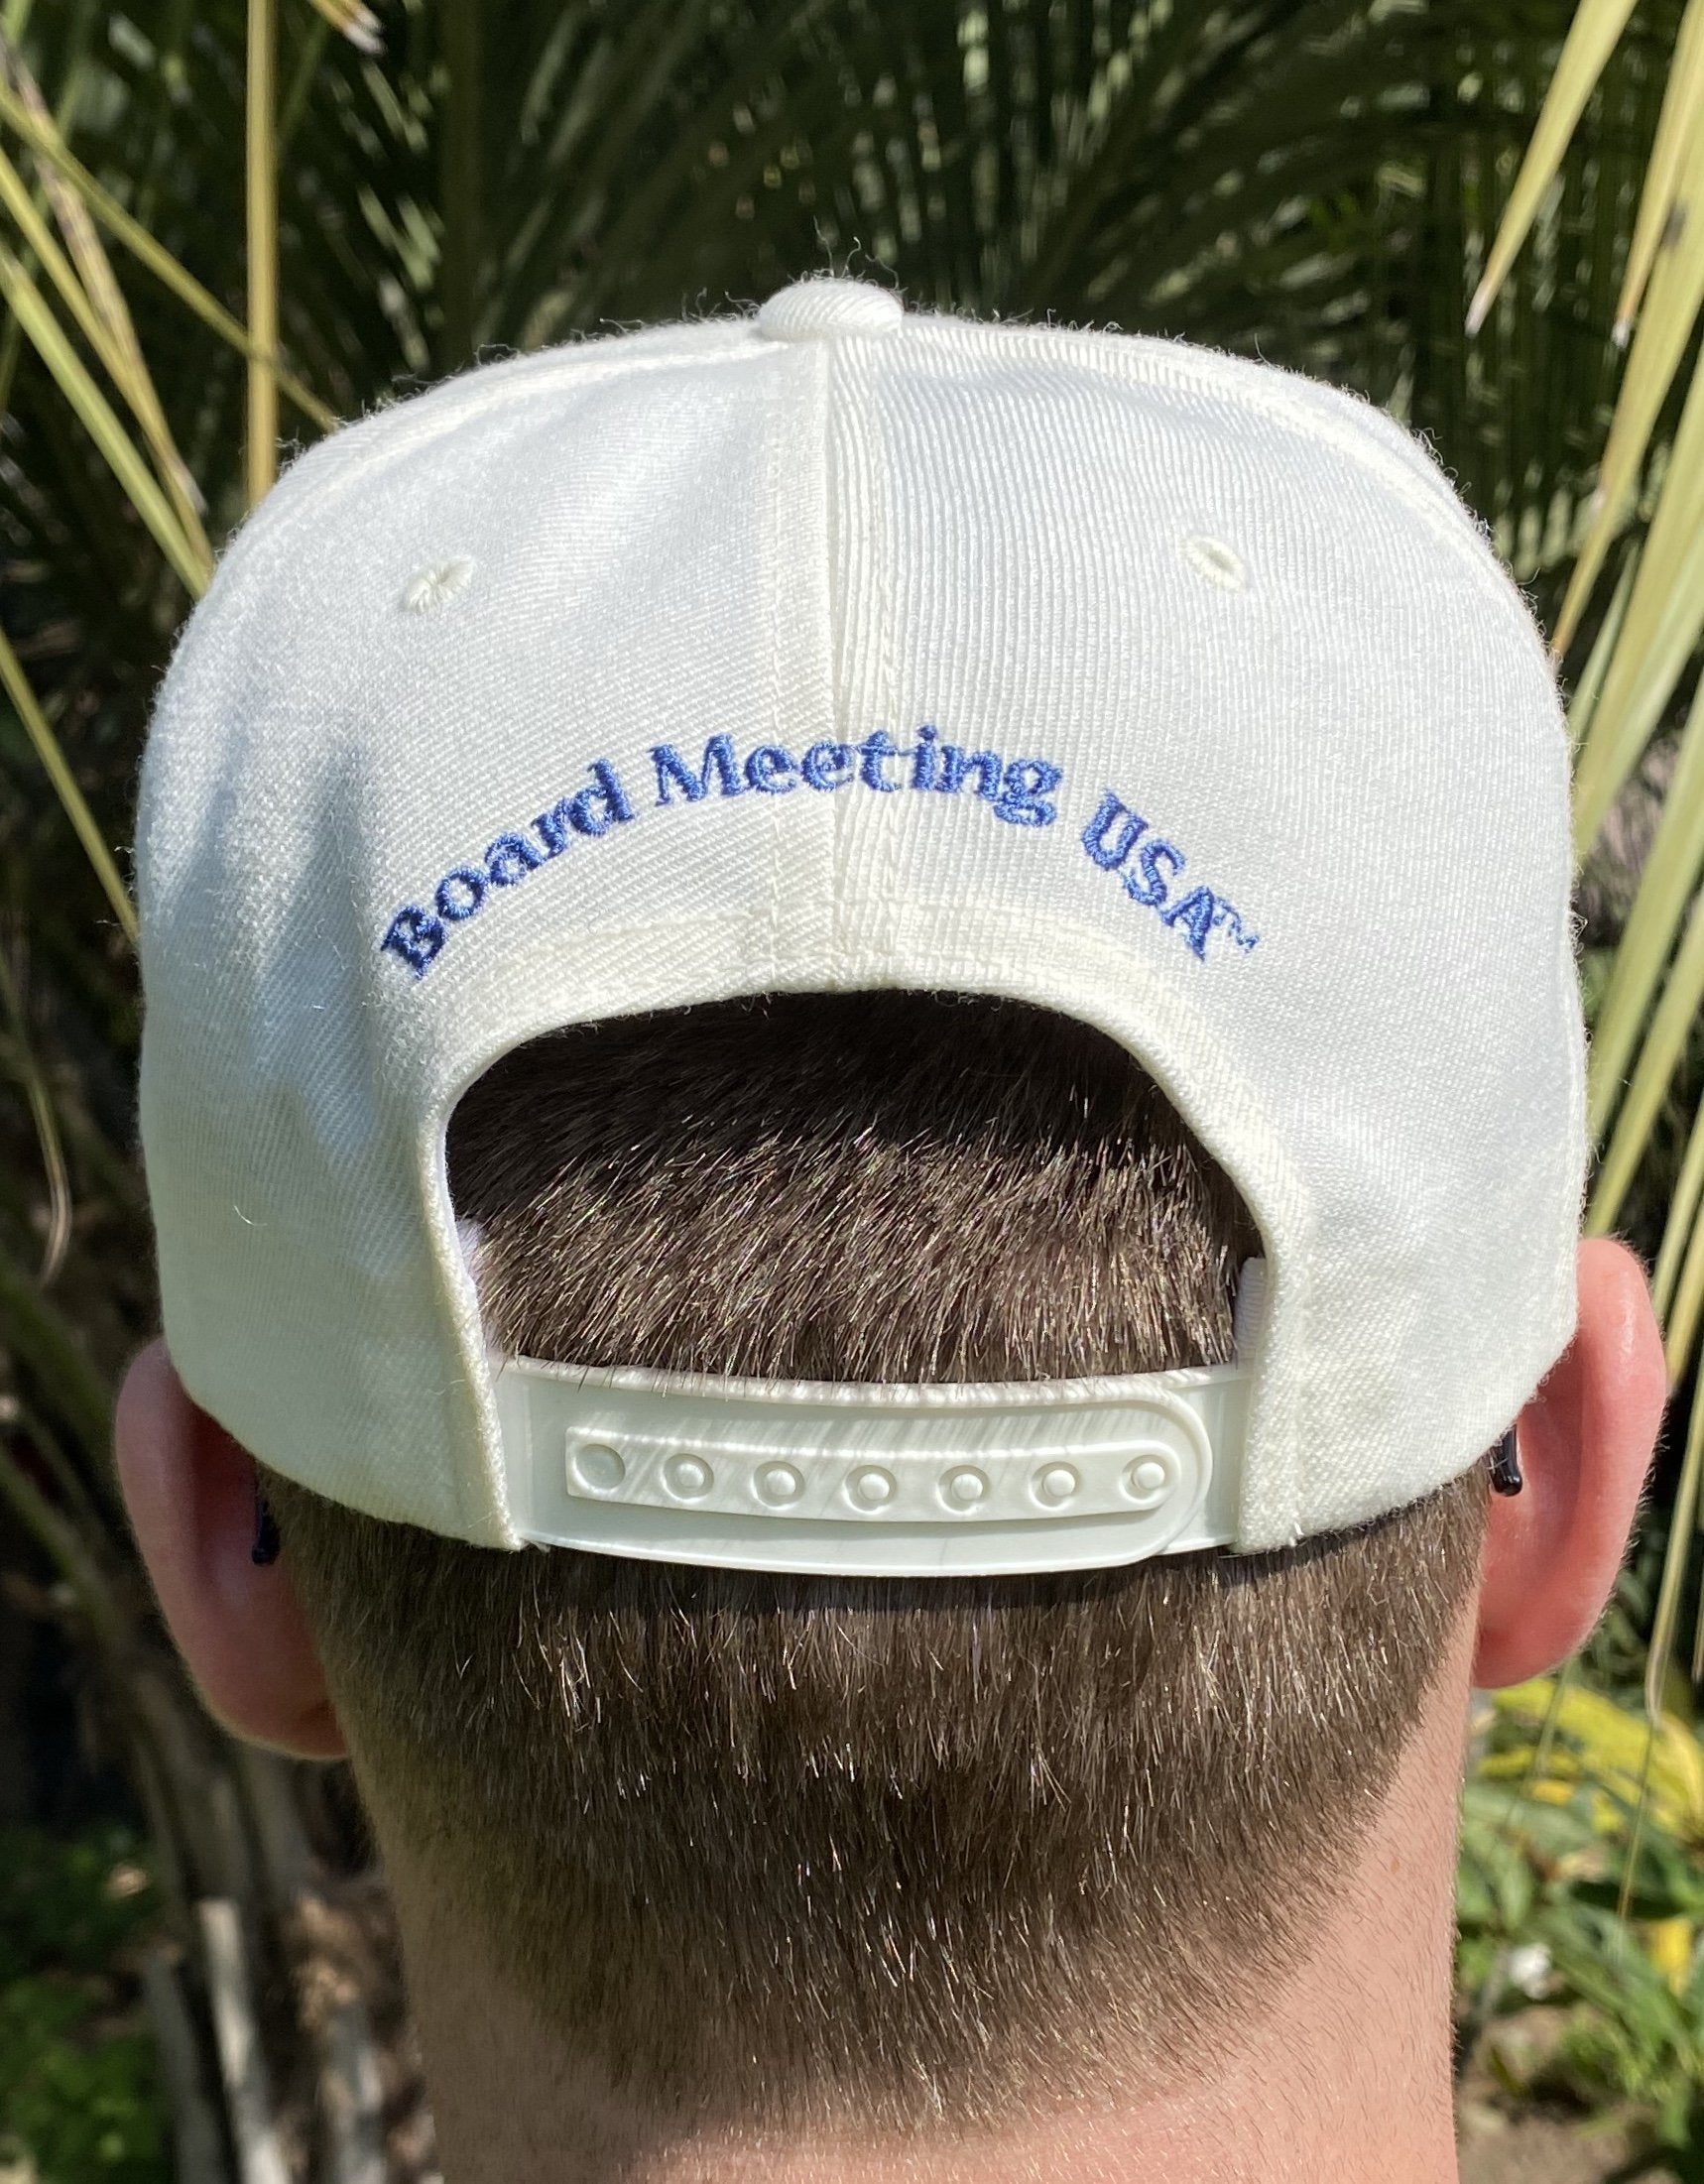 Board Meeting USA snap back hat surfing  